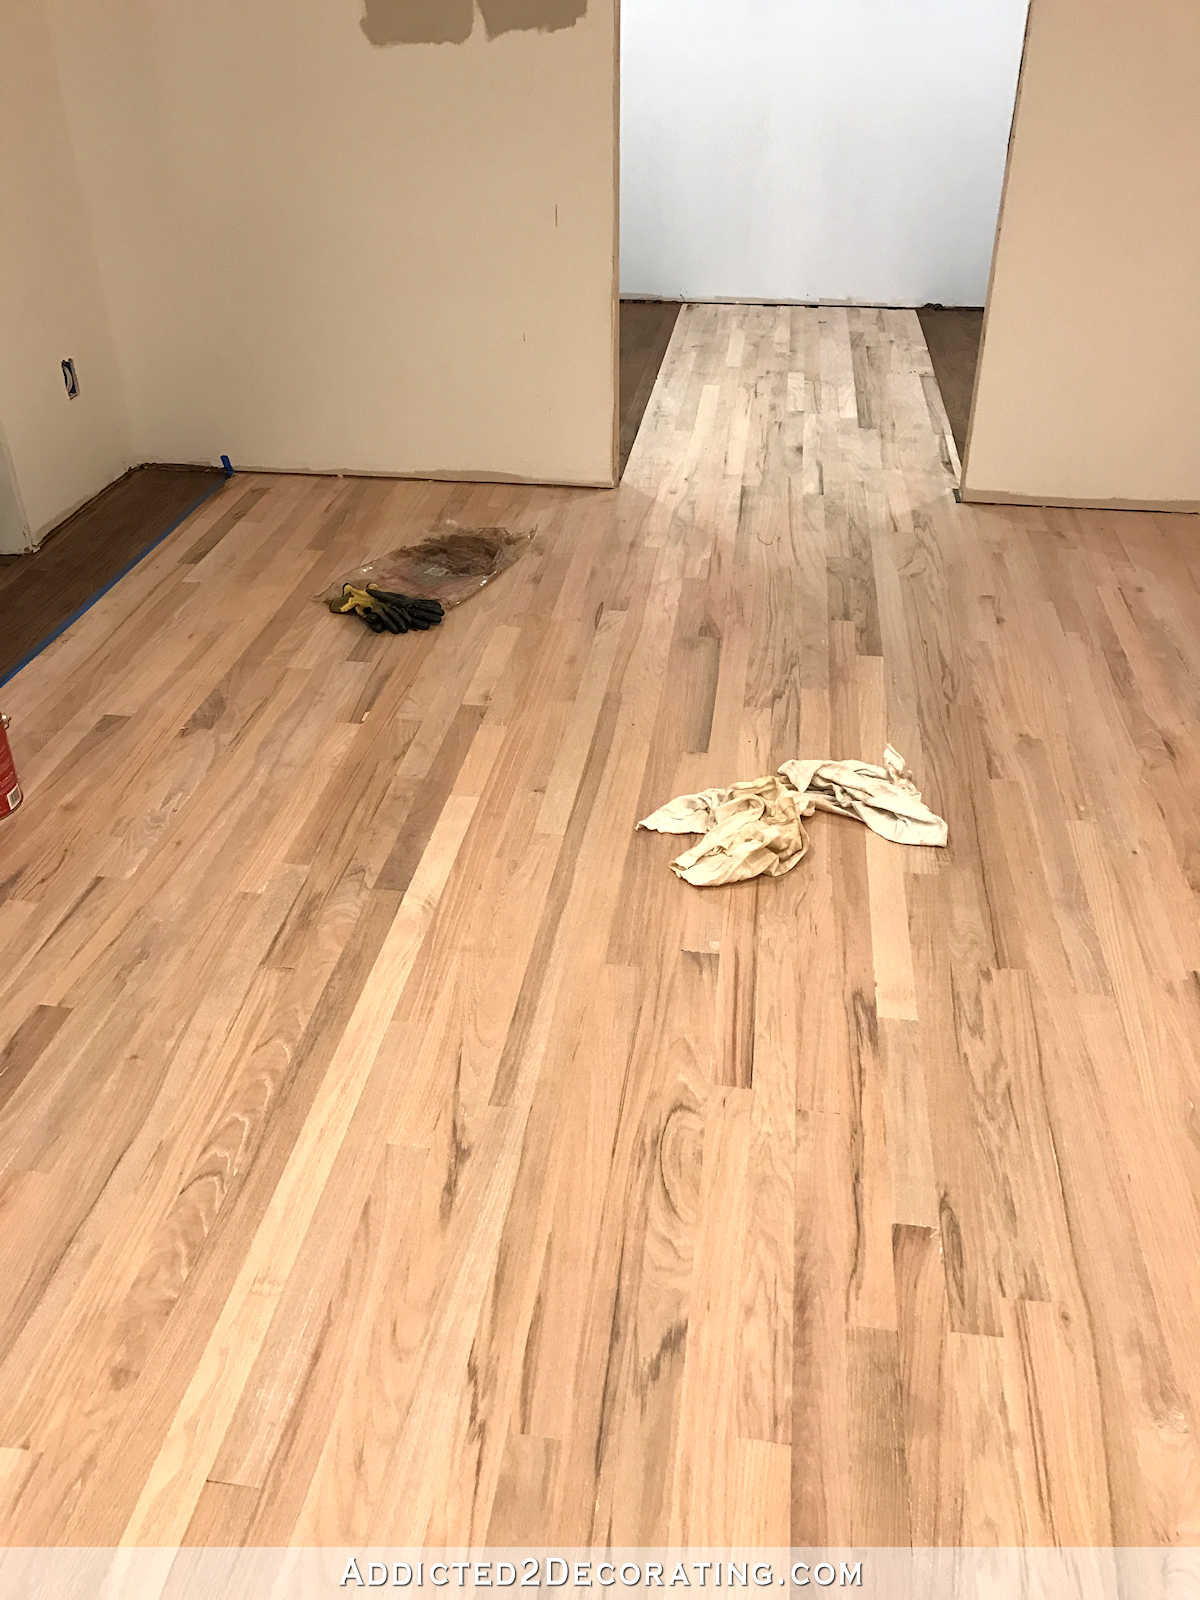 how to select hardwood floor color of adventures in staining my red oak hardwood floors products process pertaining to staining red oak hardwood floors 12 breakfast room and center of pantry left to